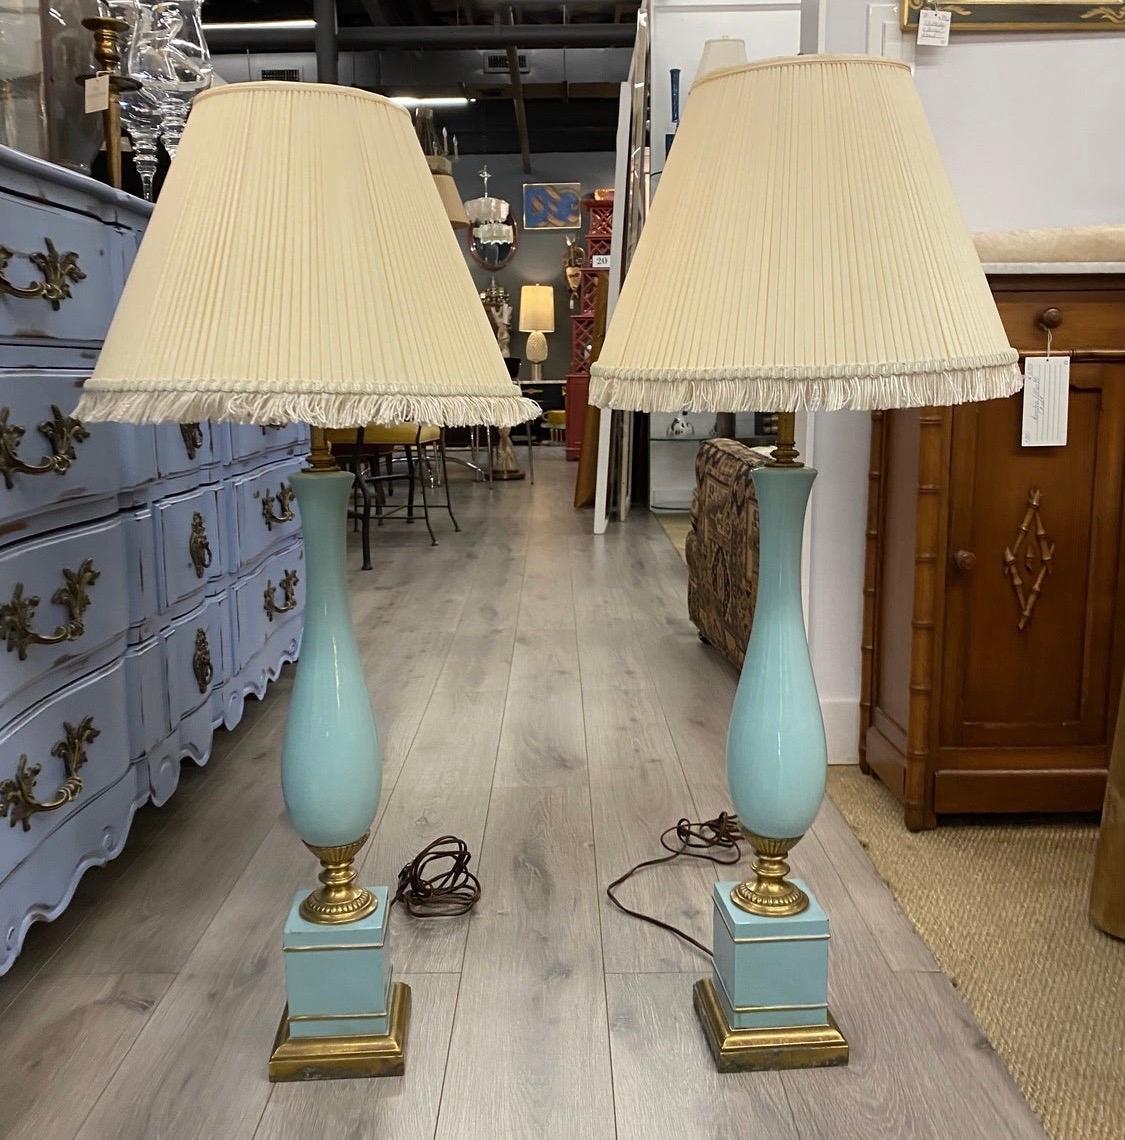 Iconic Mid-Century Modern lighting for the customer who thought they had seen everything.
Wired for USA and in perfect working order. True period pieces. Now, more than ever, home is where the heart is.